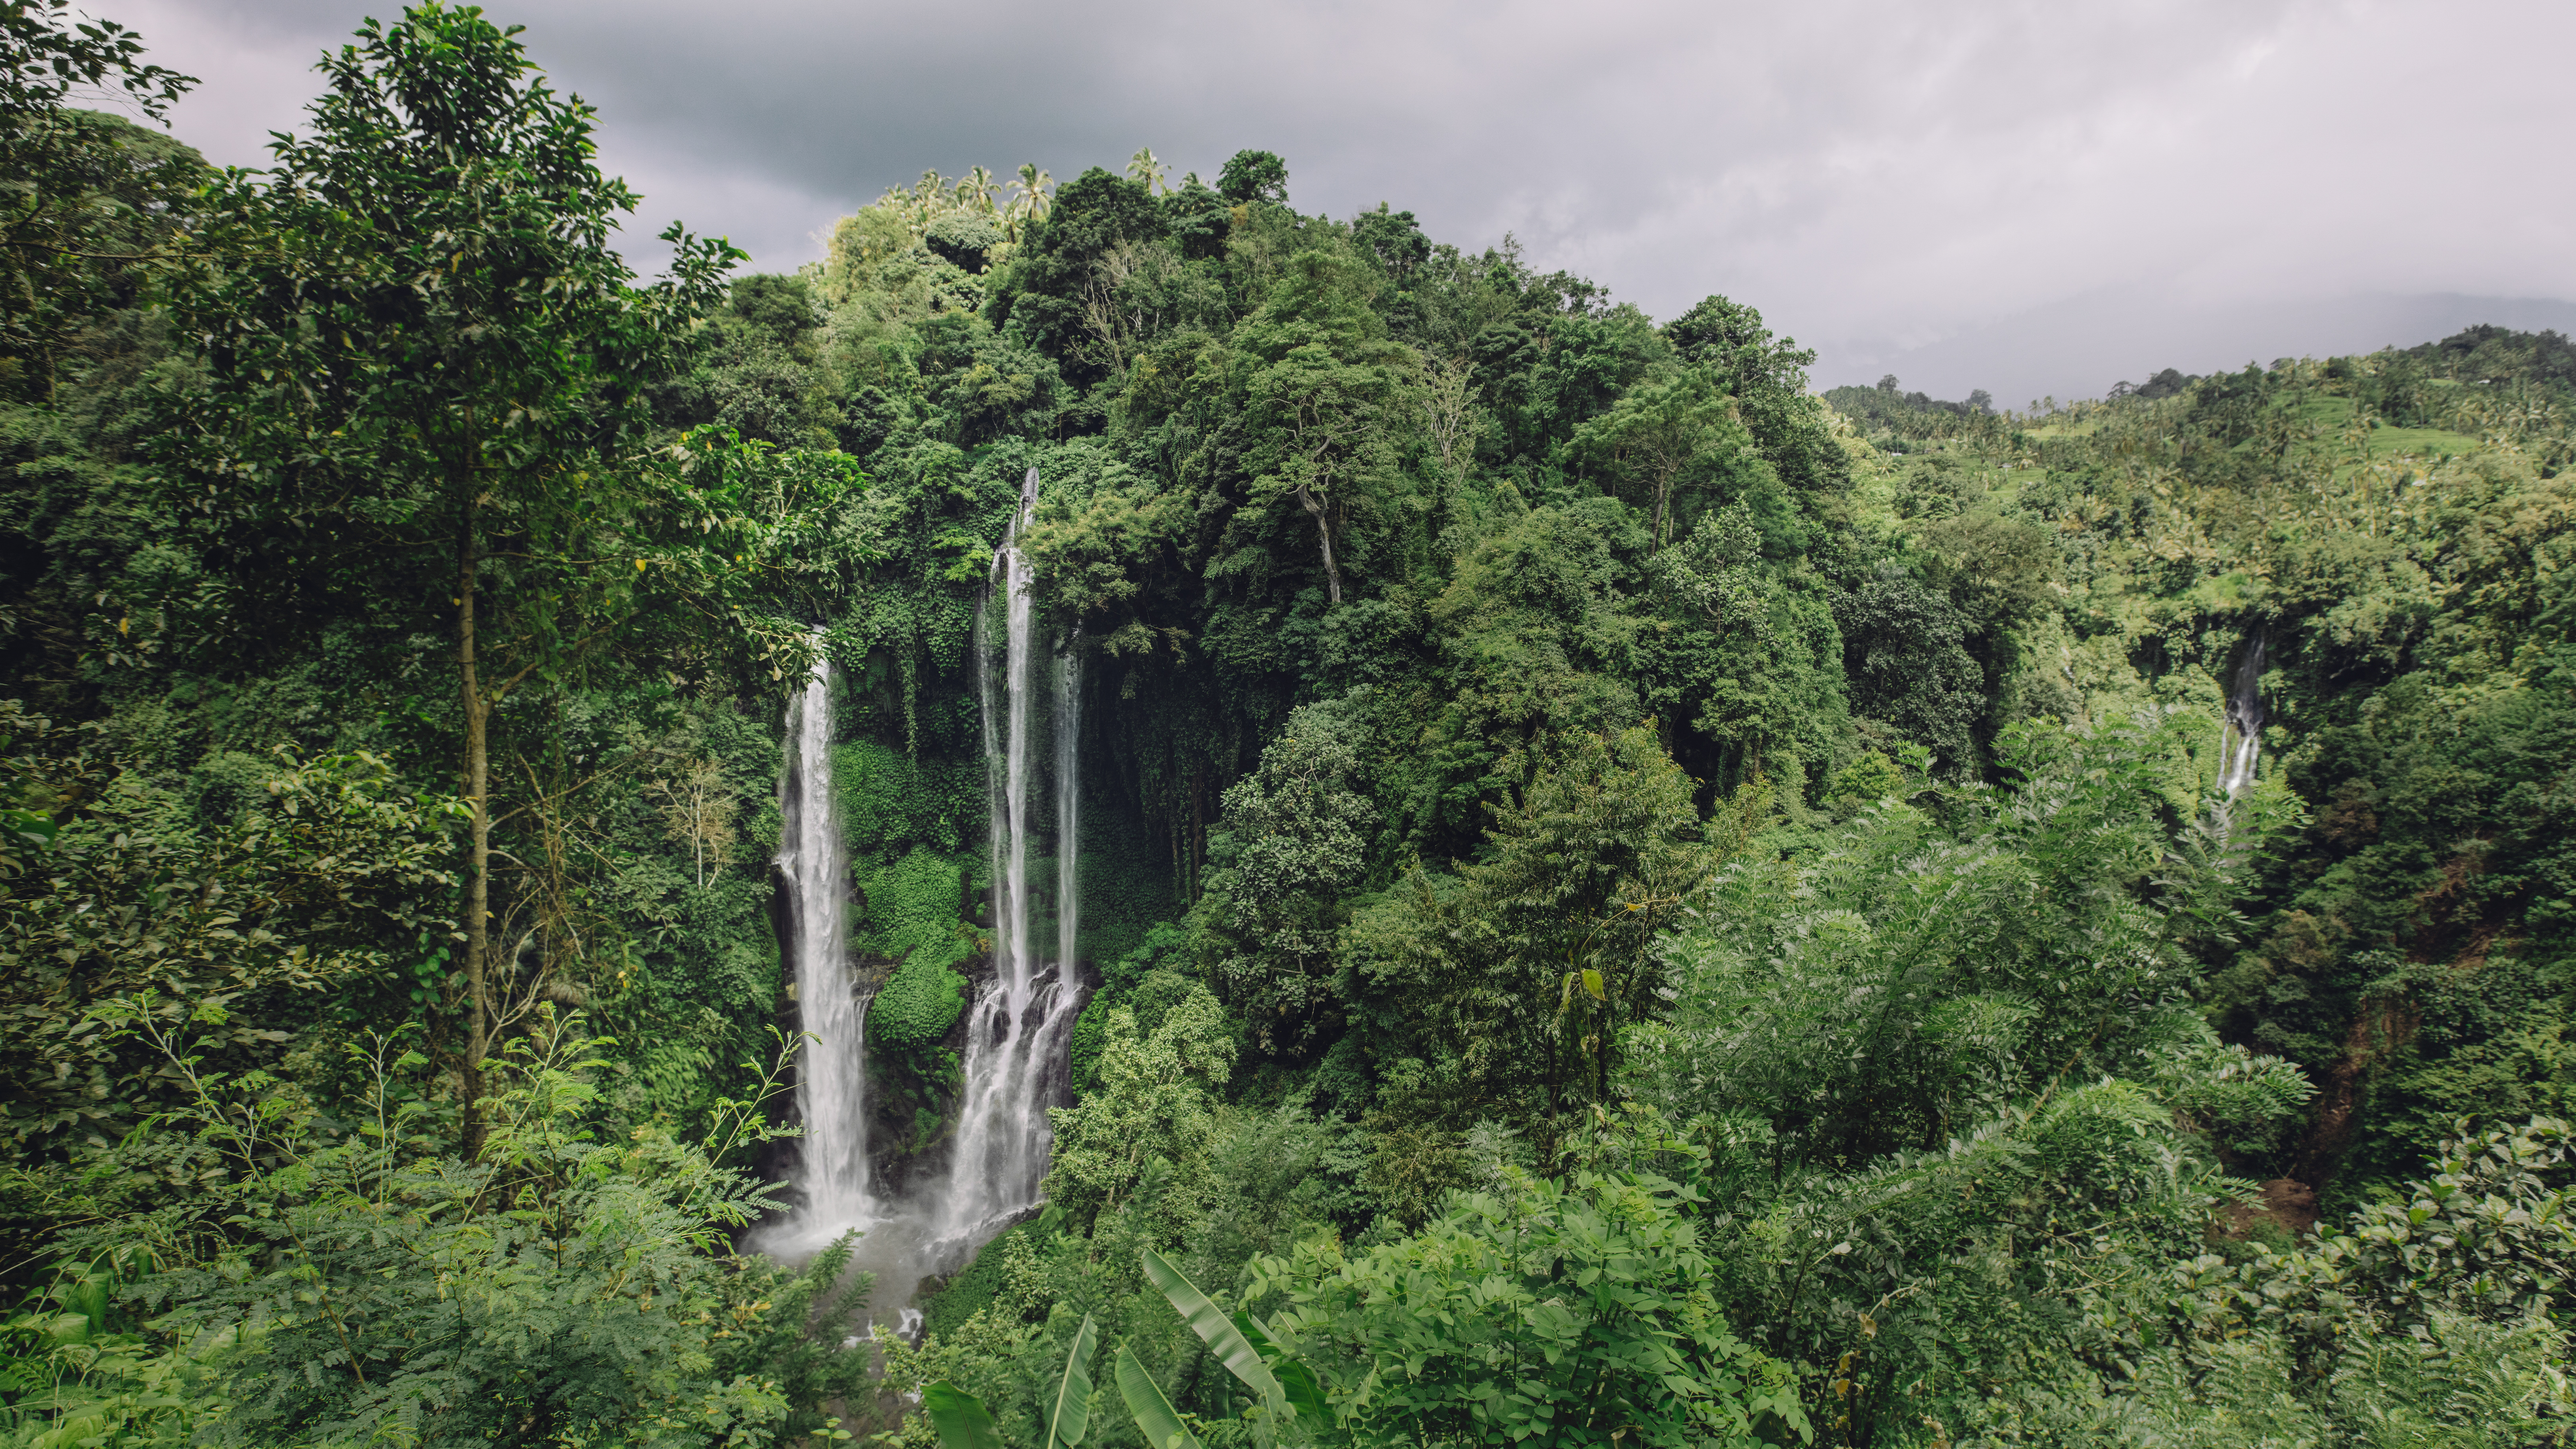 Dense trees and waterfall in tropical rainforest on an overcast day Source: envato